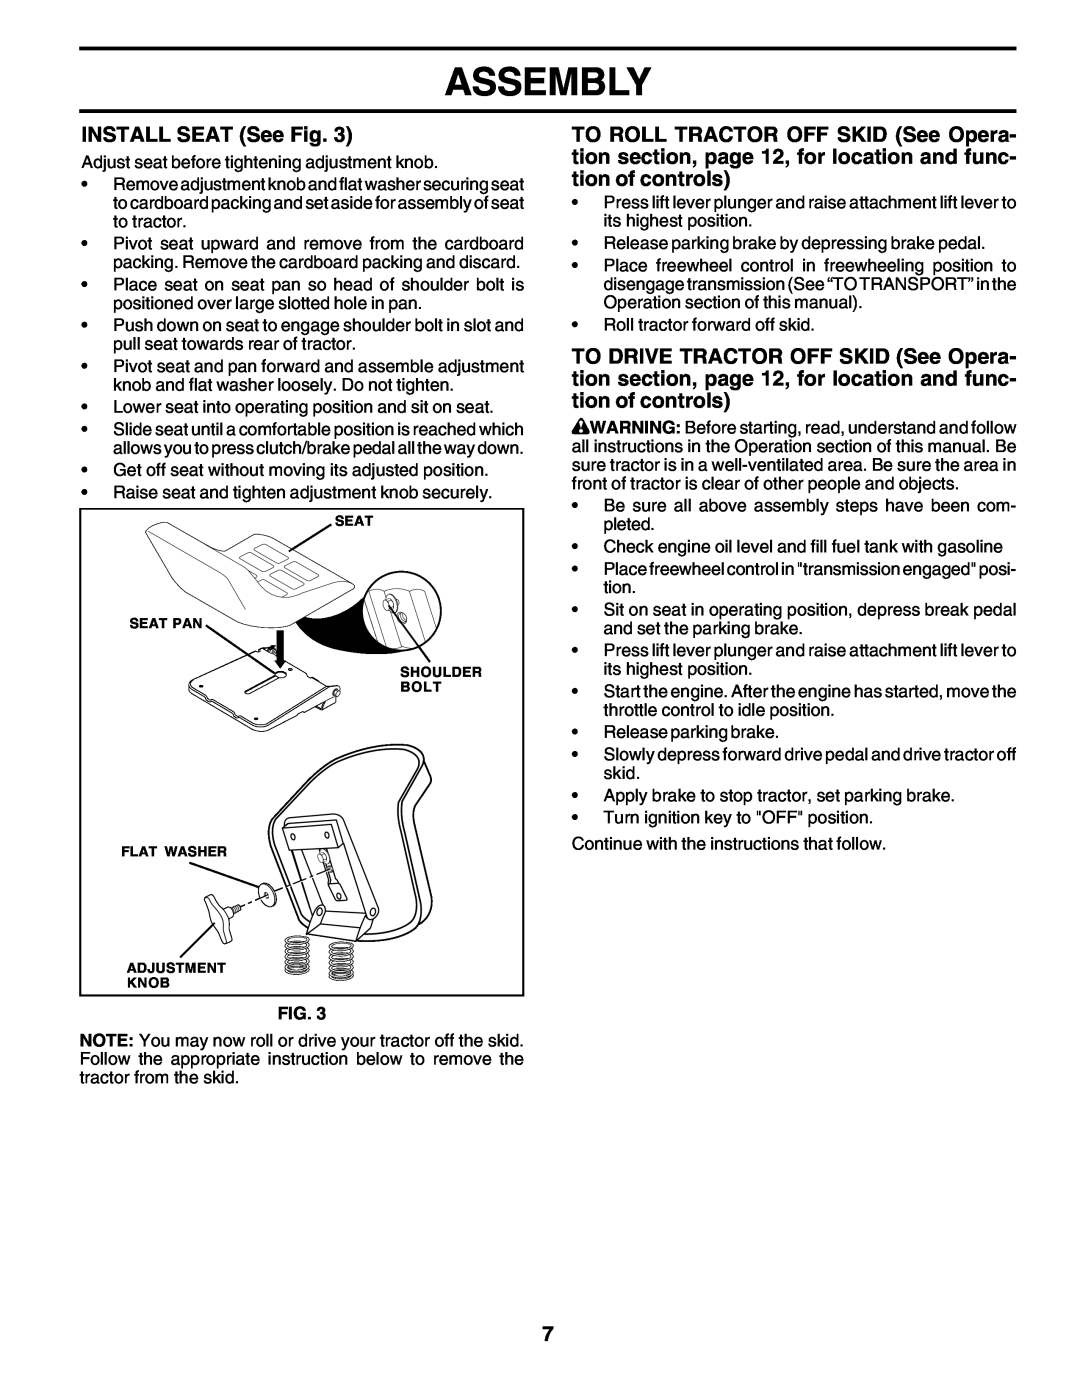 Poulan 180200 owner manual Assembly, INSTALL SEAT See Fig 